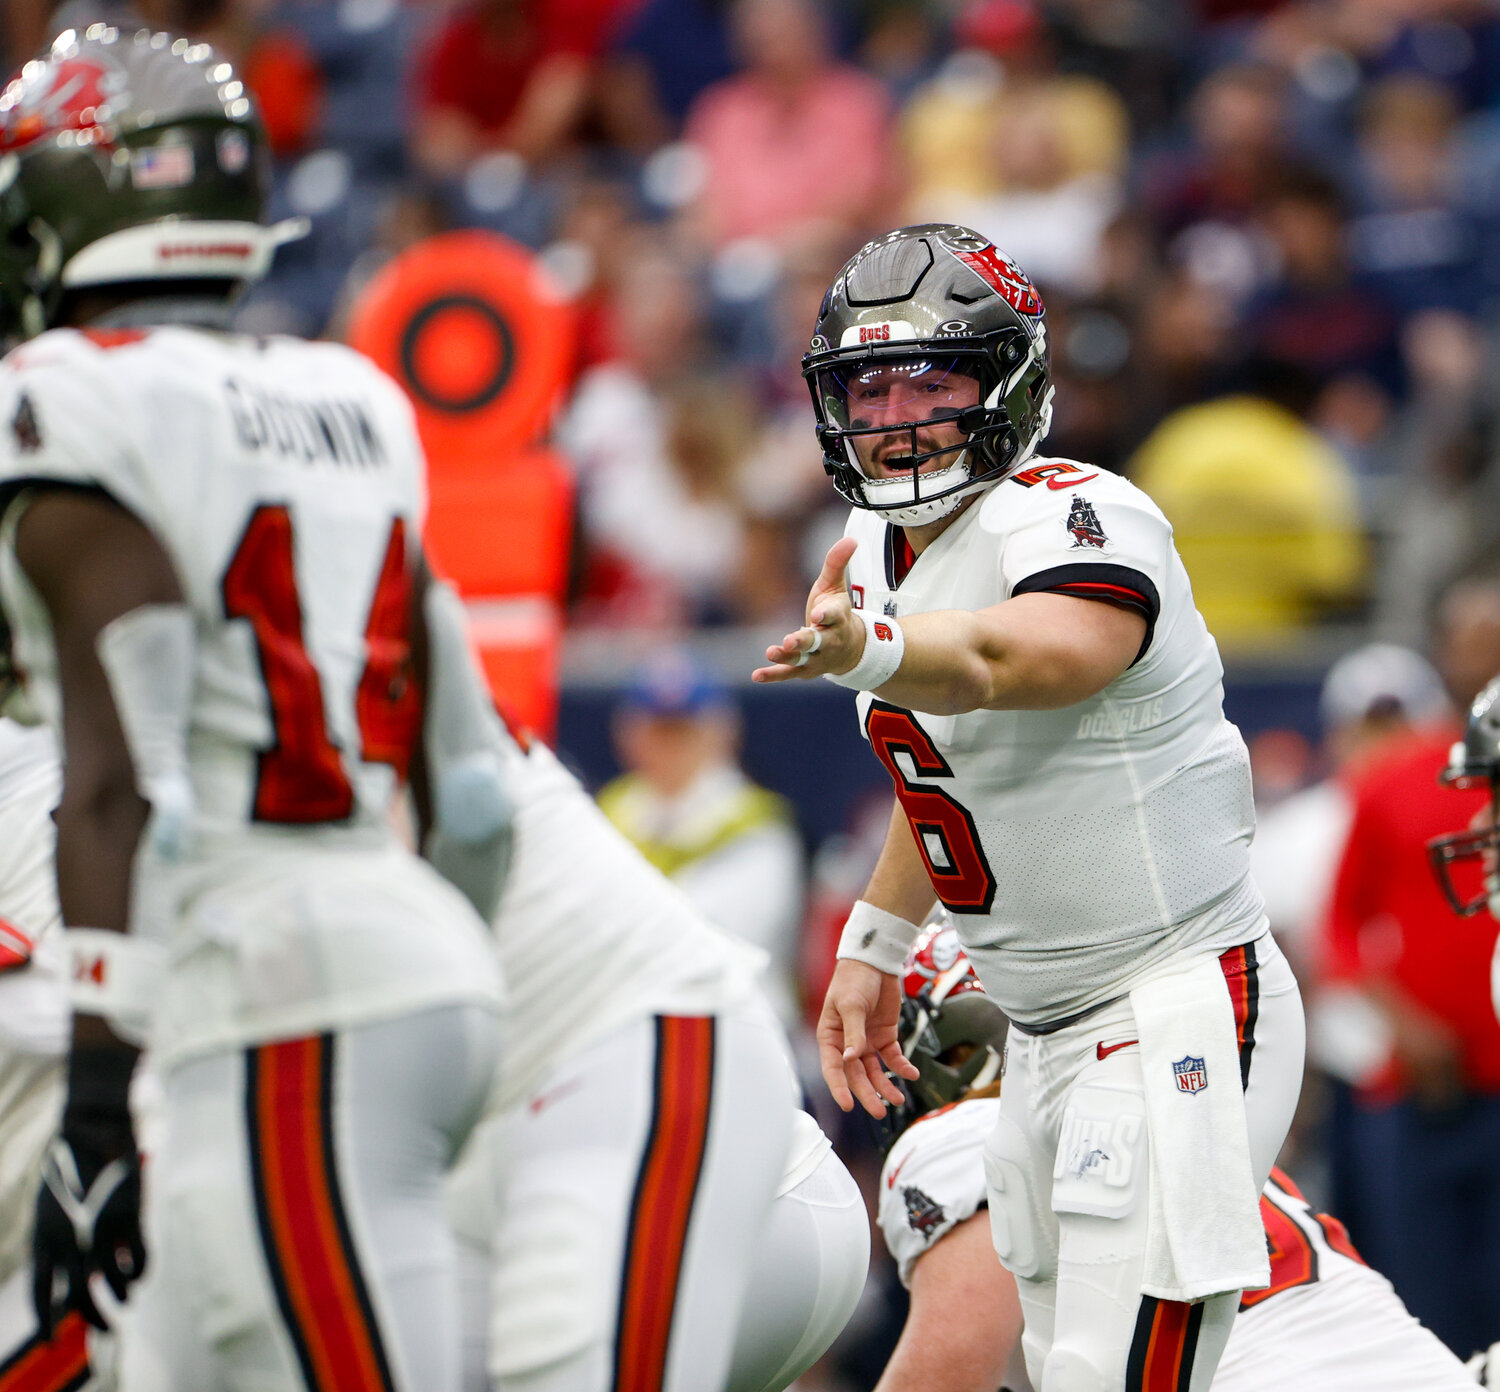 Buccaneers quarterback Baker Mayfield (6) gestures to wide receiver Chris Godwin (14) at the line of scrimmage during an NFL game between the Houston Texans and the Tampa Bay Buccaneers on November 5, 2023 in Houston.